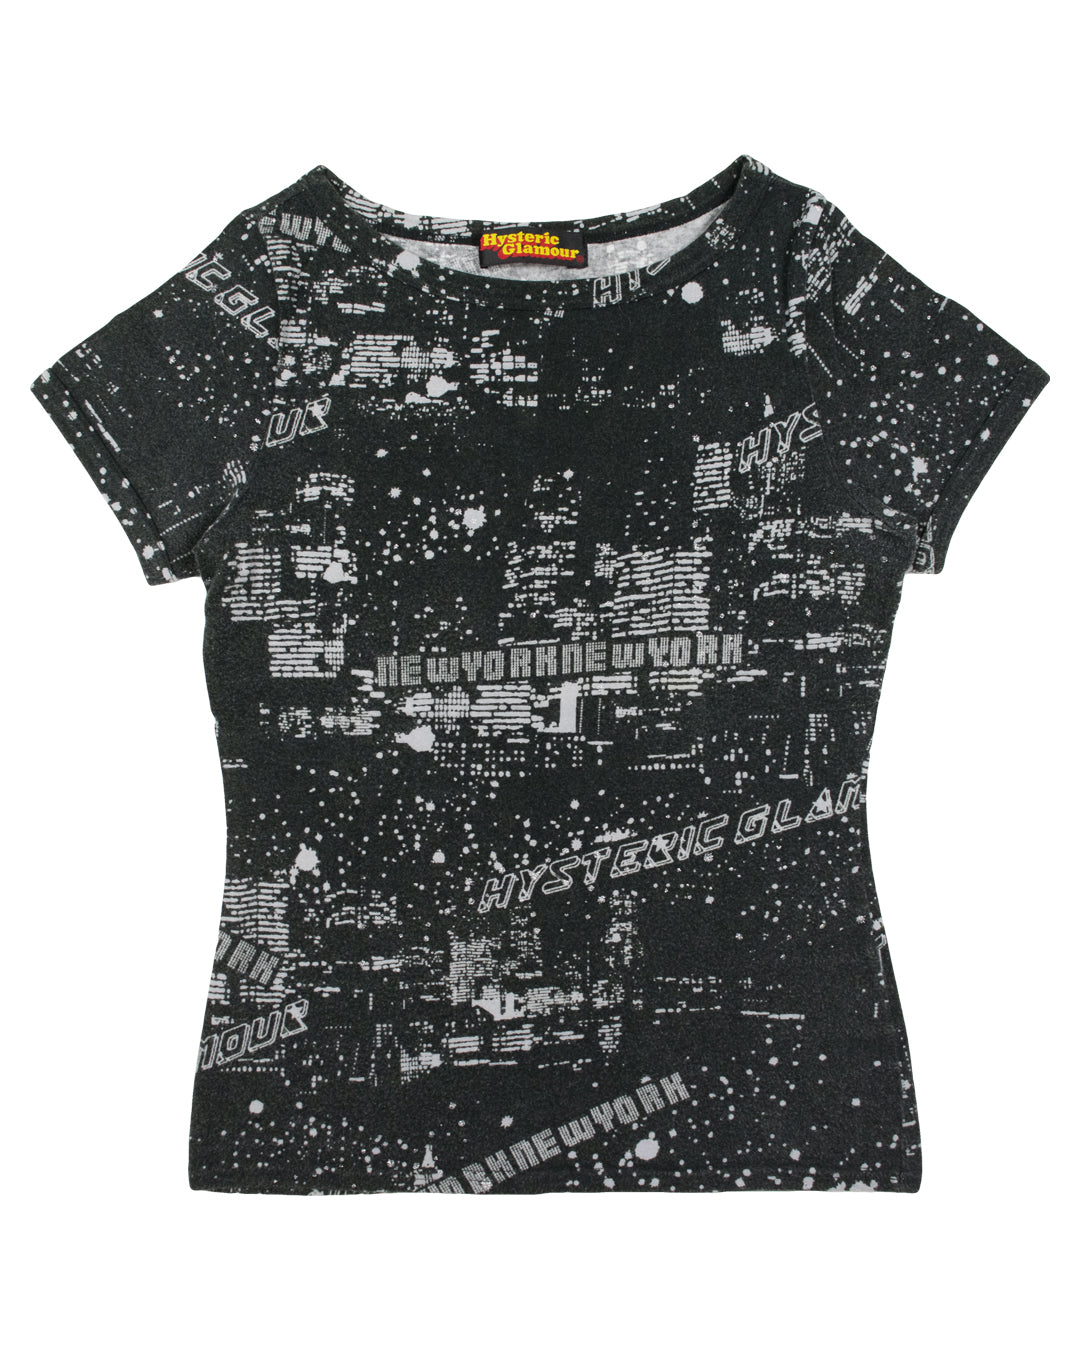 Hysteric Glamour New York City Tee